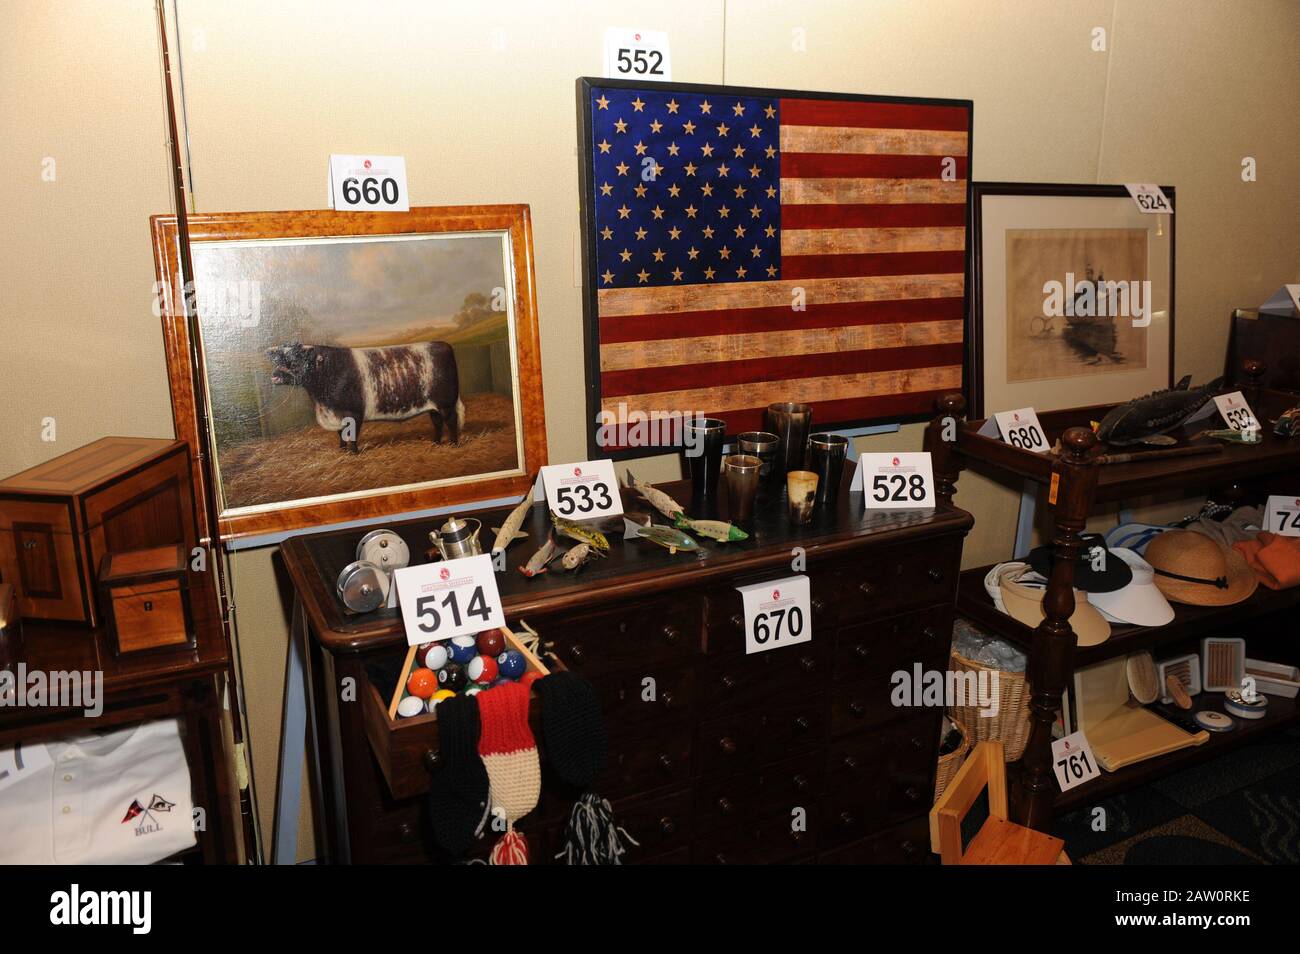 MIAMI BEACH, FL - JUNE 02: U.S. Marshals auction of more than 400 articles of jewelry, furniture, antiques and other personal property once belonging to Bernie and Ruth Madoff at the Miami Beach Convention Center on June 2, 2011 in Miami Beach, Florida People: Bernie Madoff Credit: Storms Media Group/Alamy Live News Stock Photo